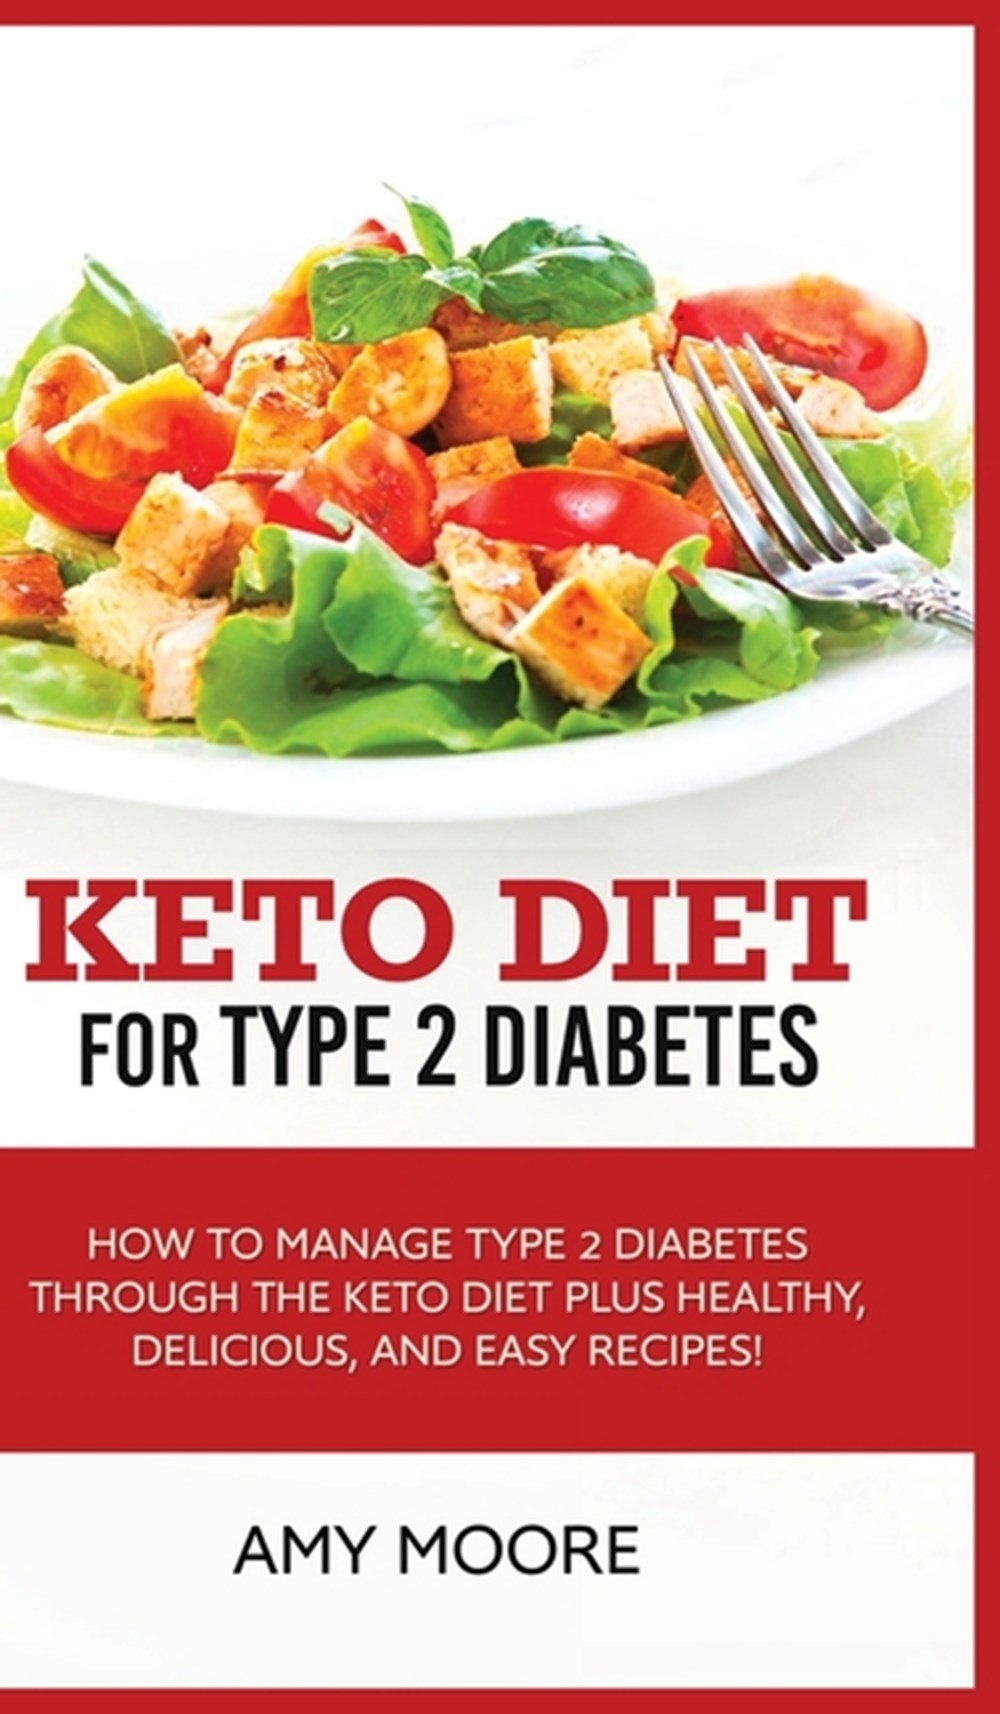 Keto Diet for Type 2 Diabetes in Hardcover by Amy Moore